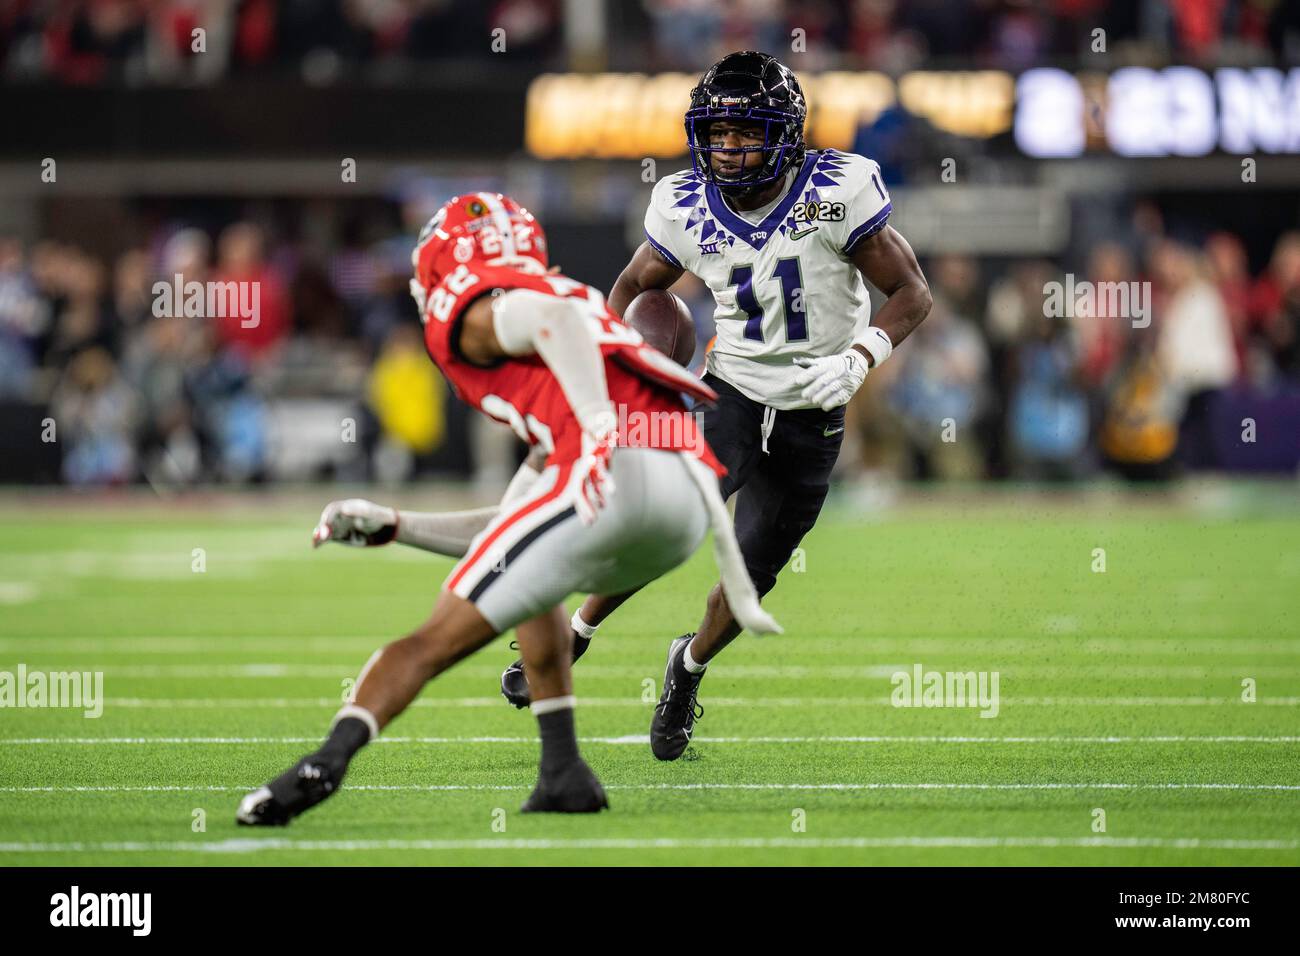 TCU Horned Frogs wide receiver Derius Davis (11) runs the ball after a catch against Georgia Bulldogs defensive back Javon Bullard (22) during the Col Stock Photo